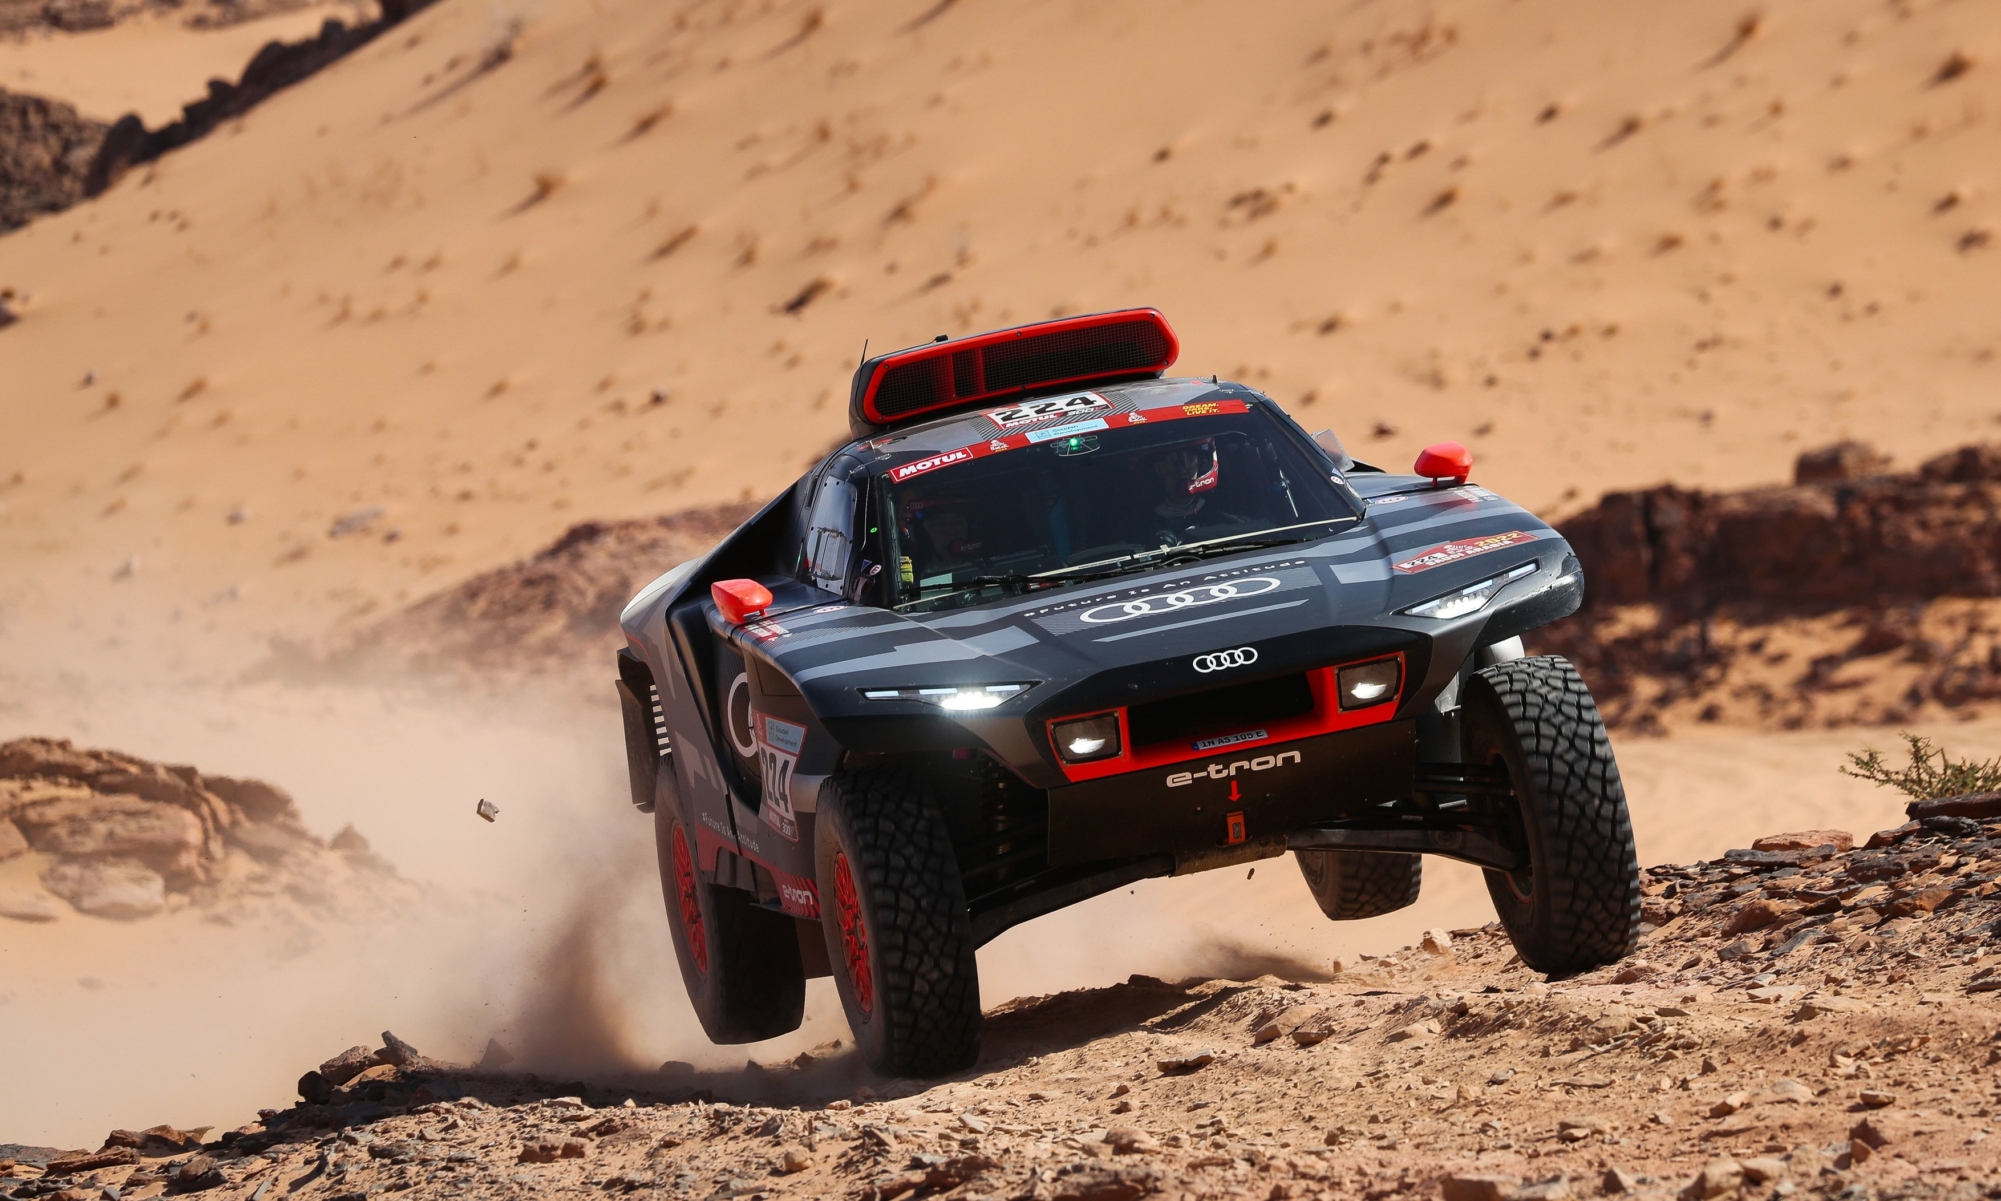 Audi struck back at the front-runners with a spectacular 1-2 finish on stage 10.